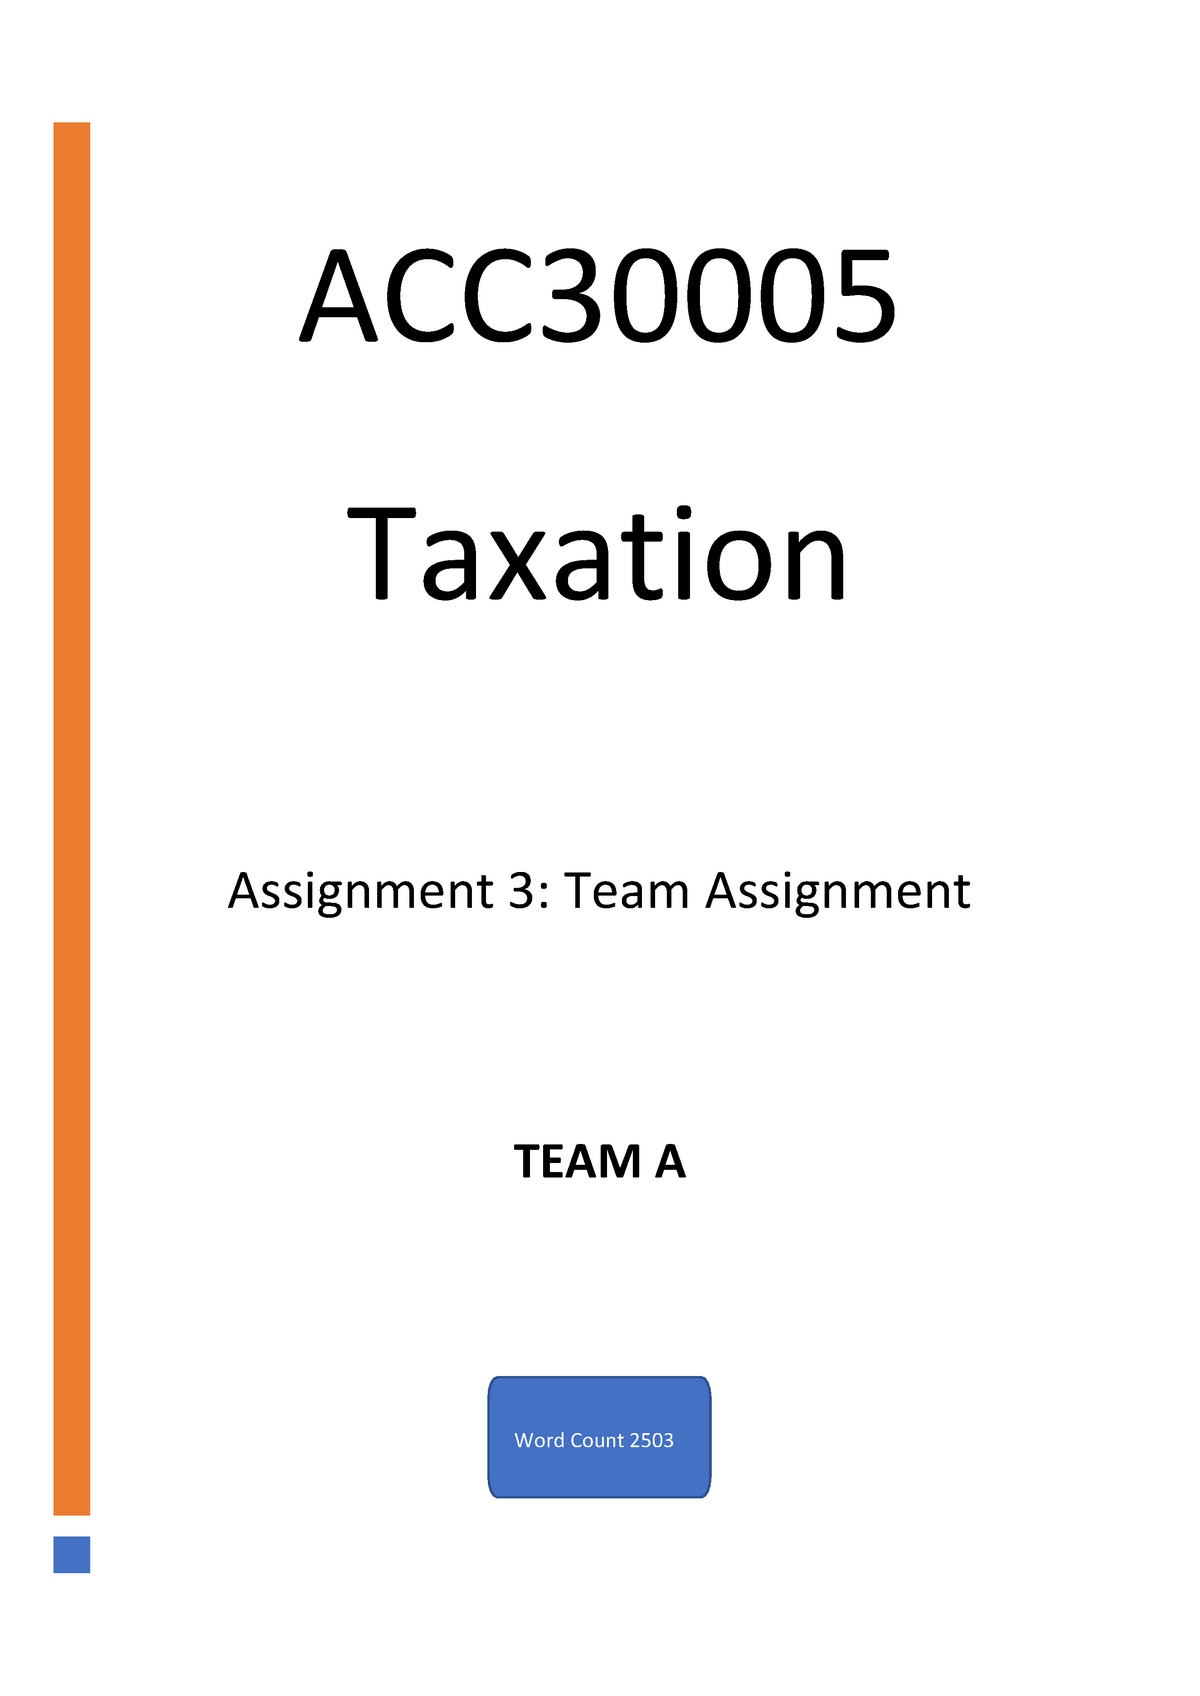 assignment topics for taxation